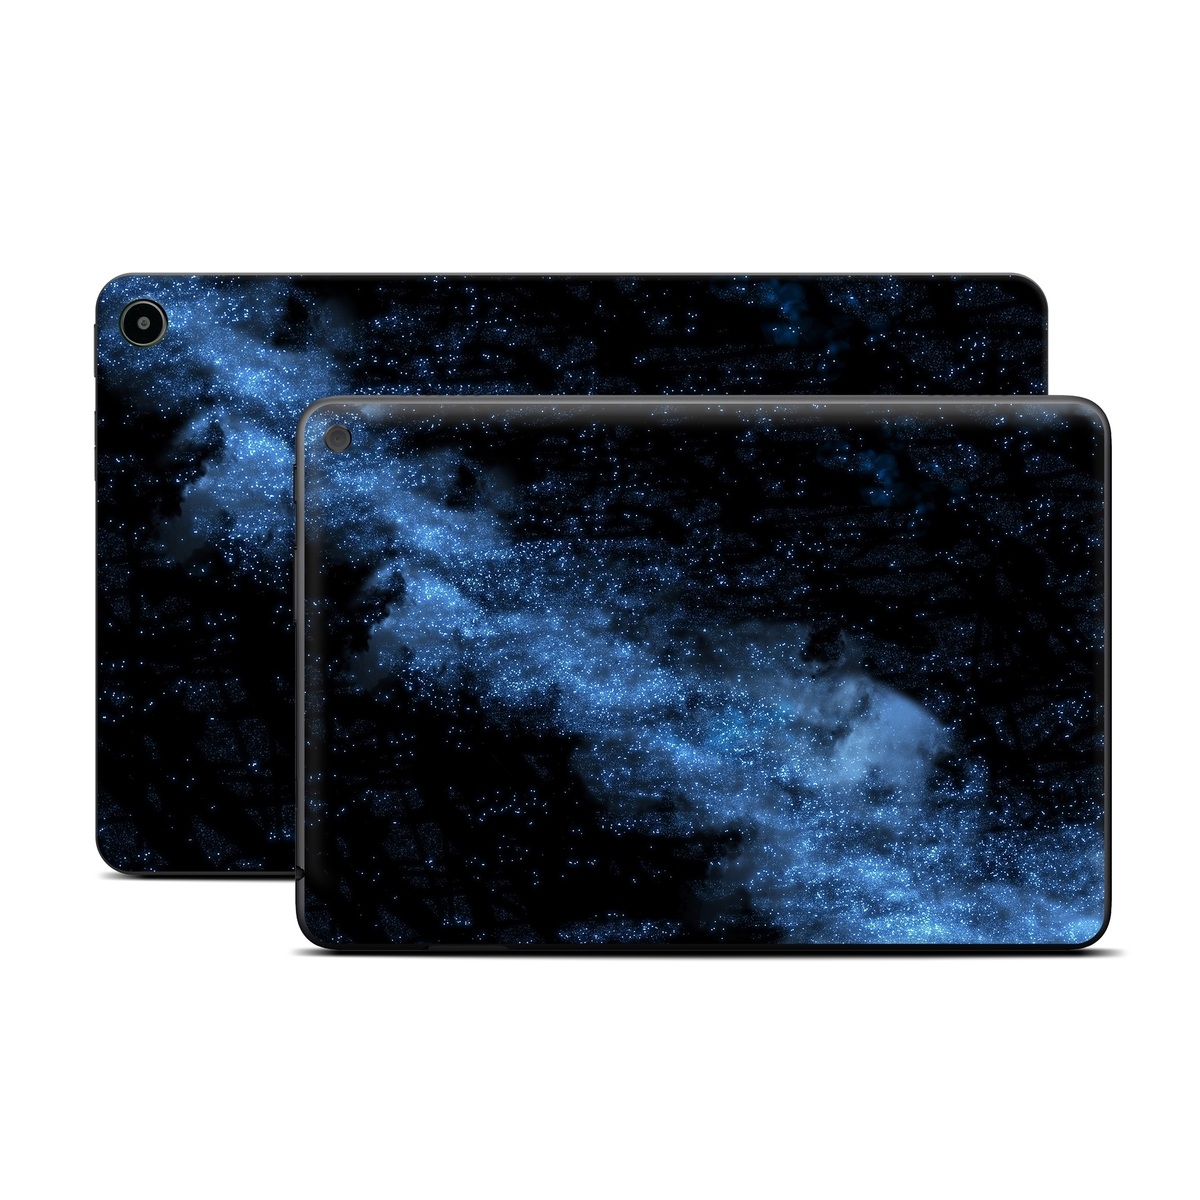 Amazon Fire Tablet Series Skin Skin design of Sky, Atmosphere, Black, Blue, Outer space, Atmospheric phenomenon, Astronomical object, Darkness, Universe, Space, with black, blue colors